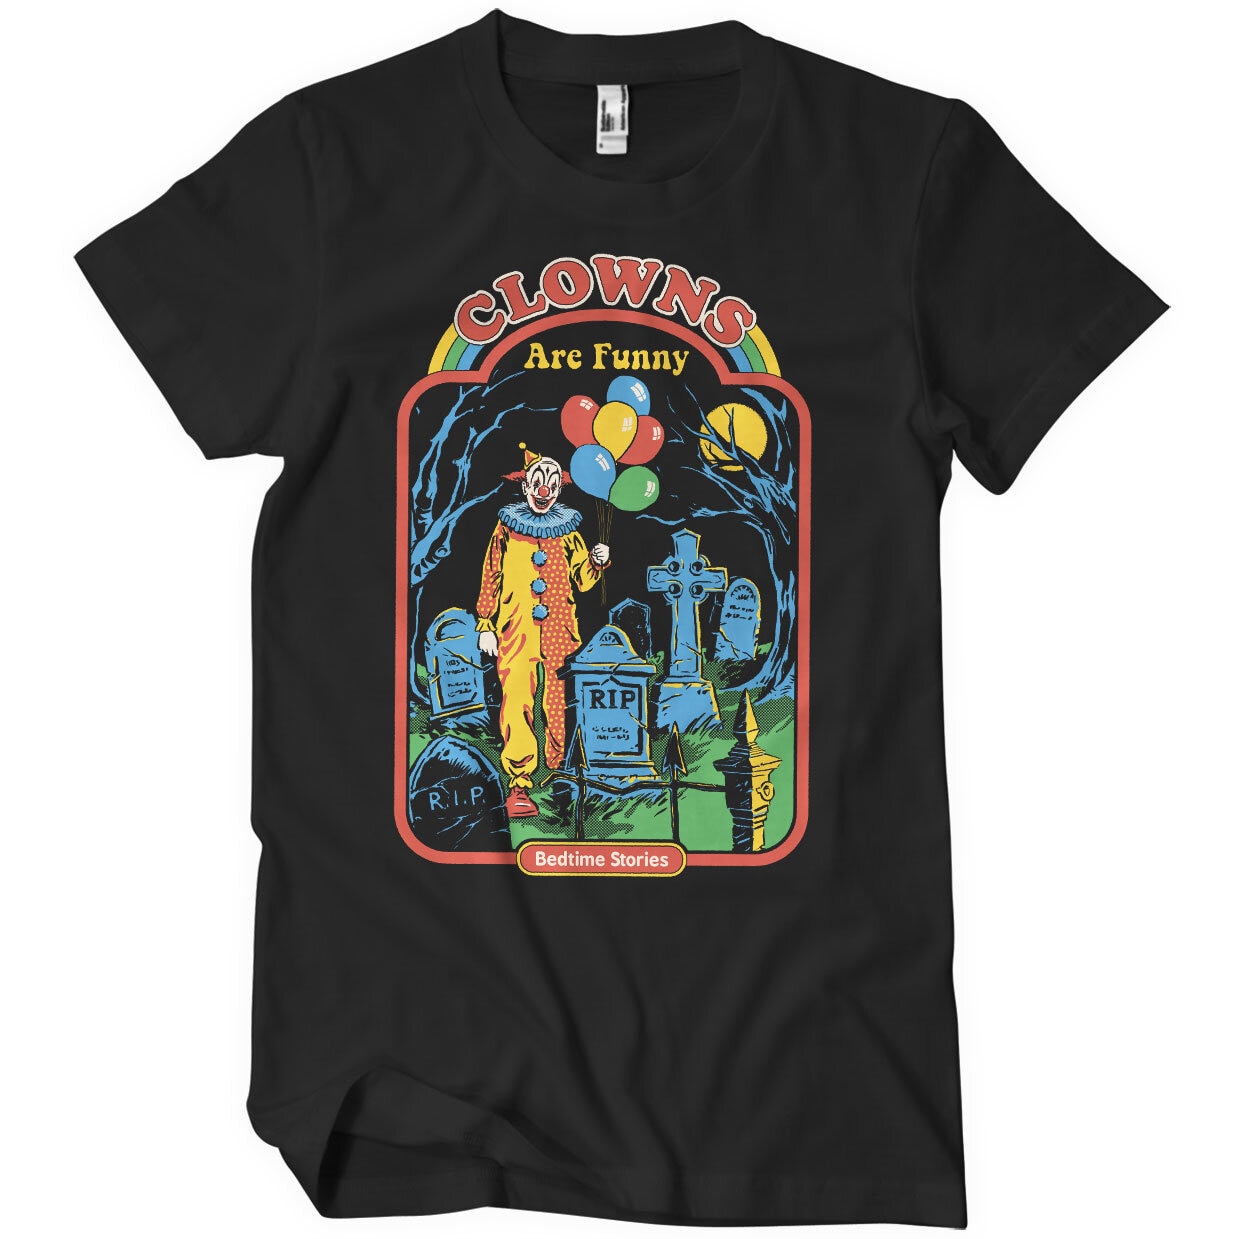 Clowns Are Funny T-Shirt